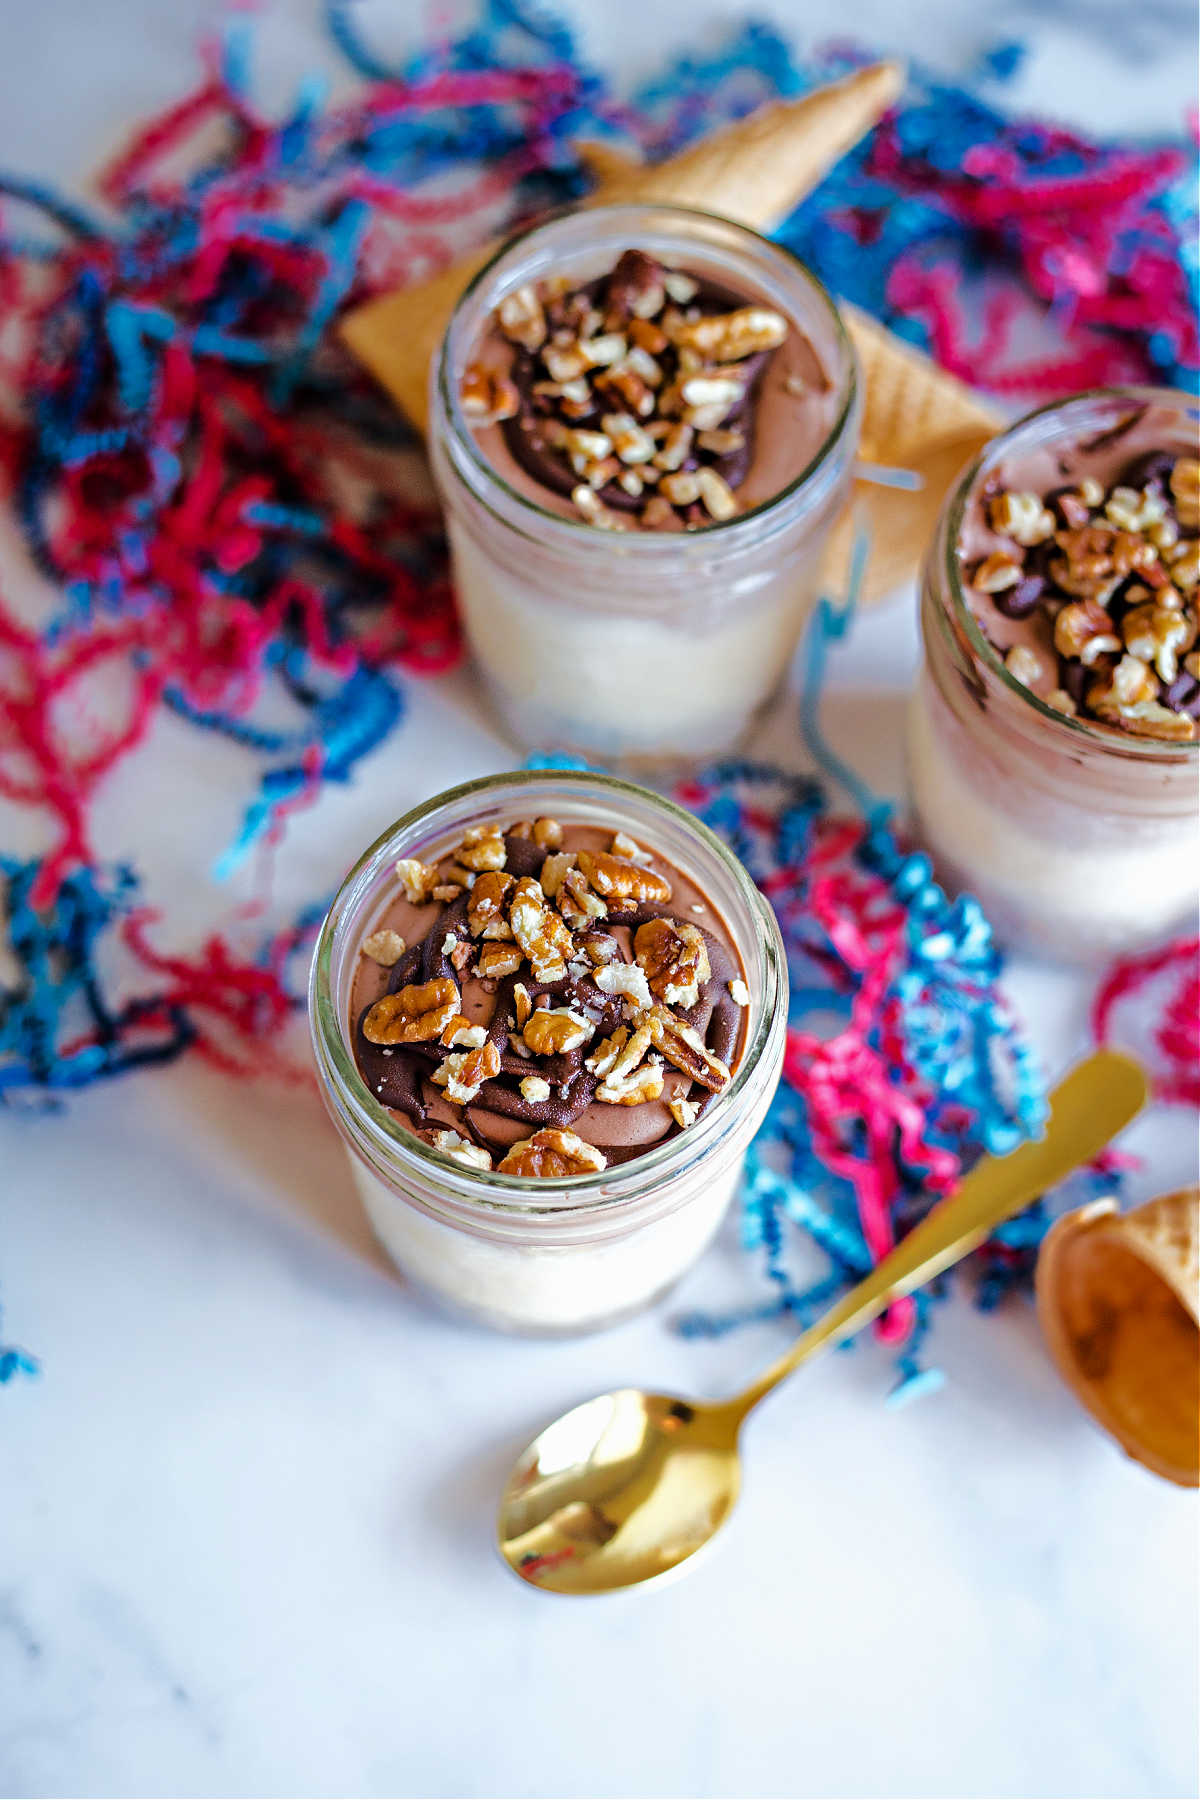 ice cream pie in a jar with chocolate whipped cream, nutella, and nuts.